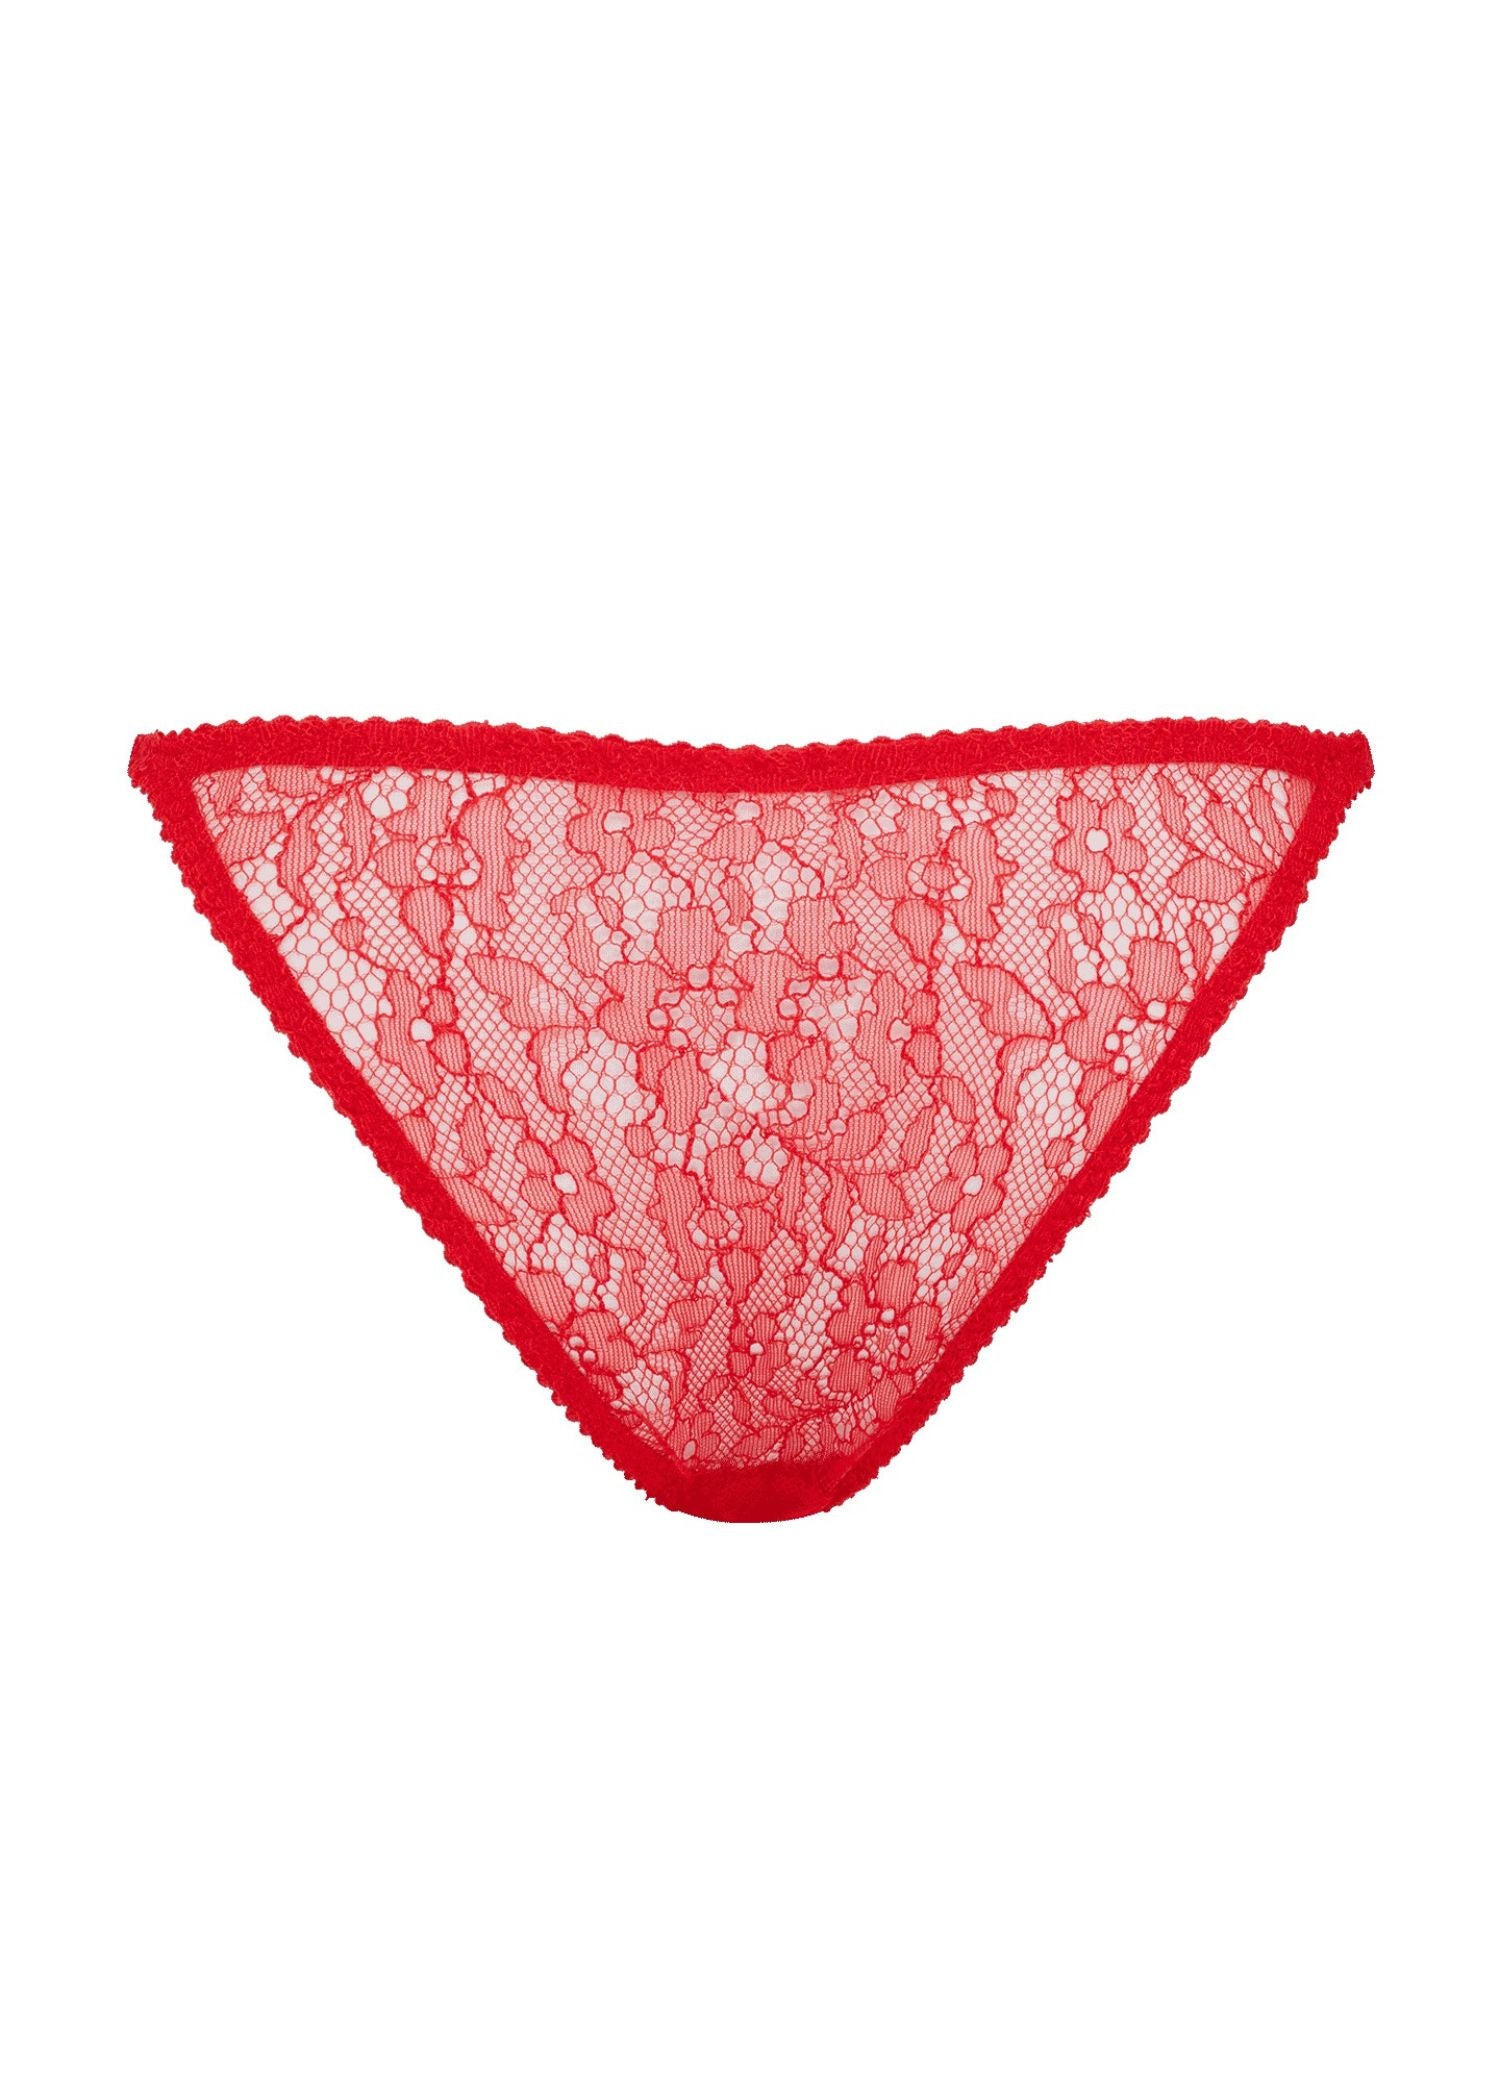 Agent Provocateur Lorna Lace Knicker Brief (Red) | Avec Amour Luxury Lingerie